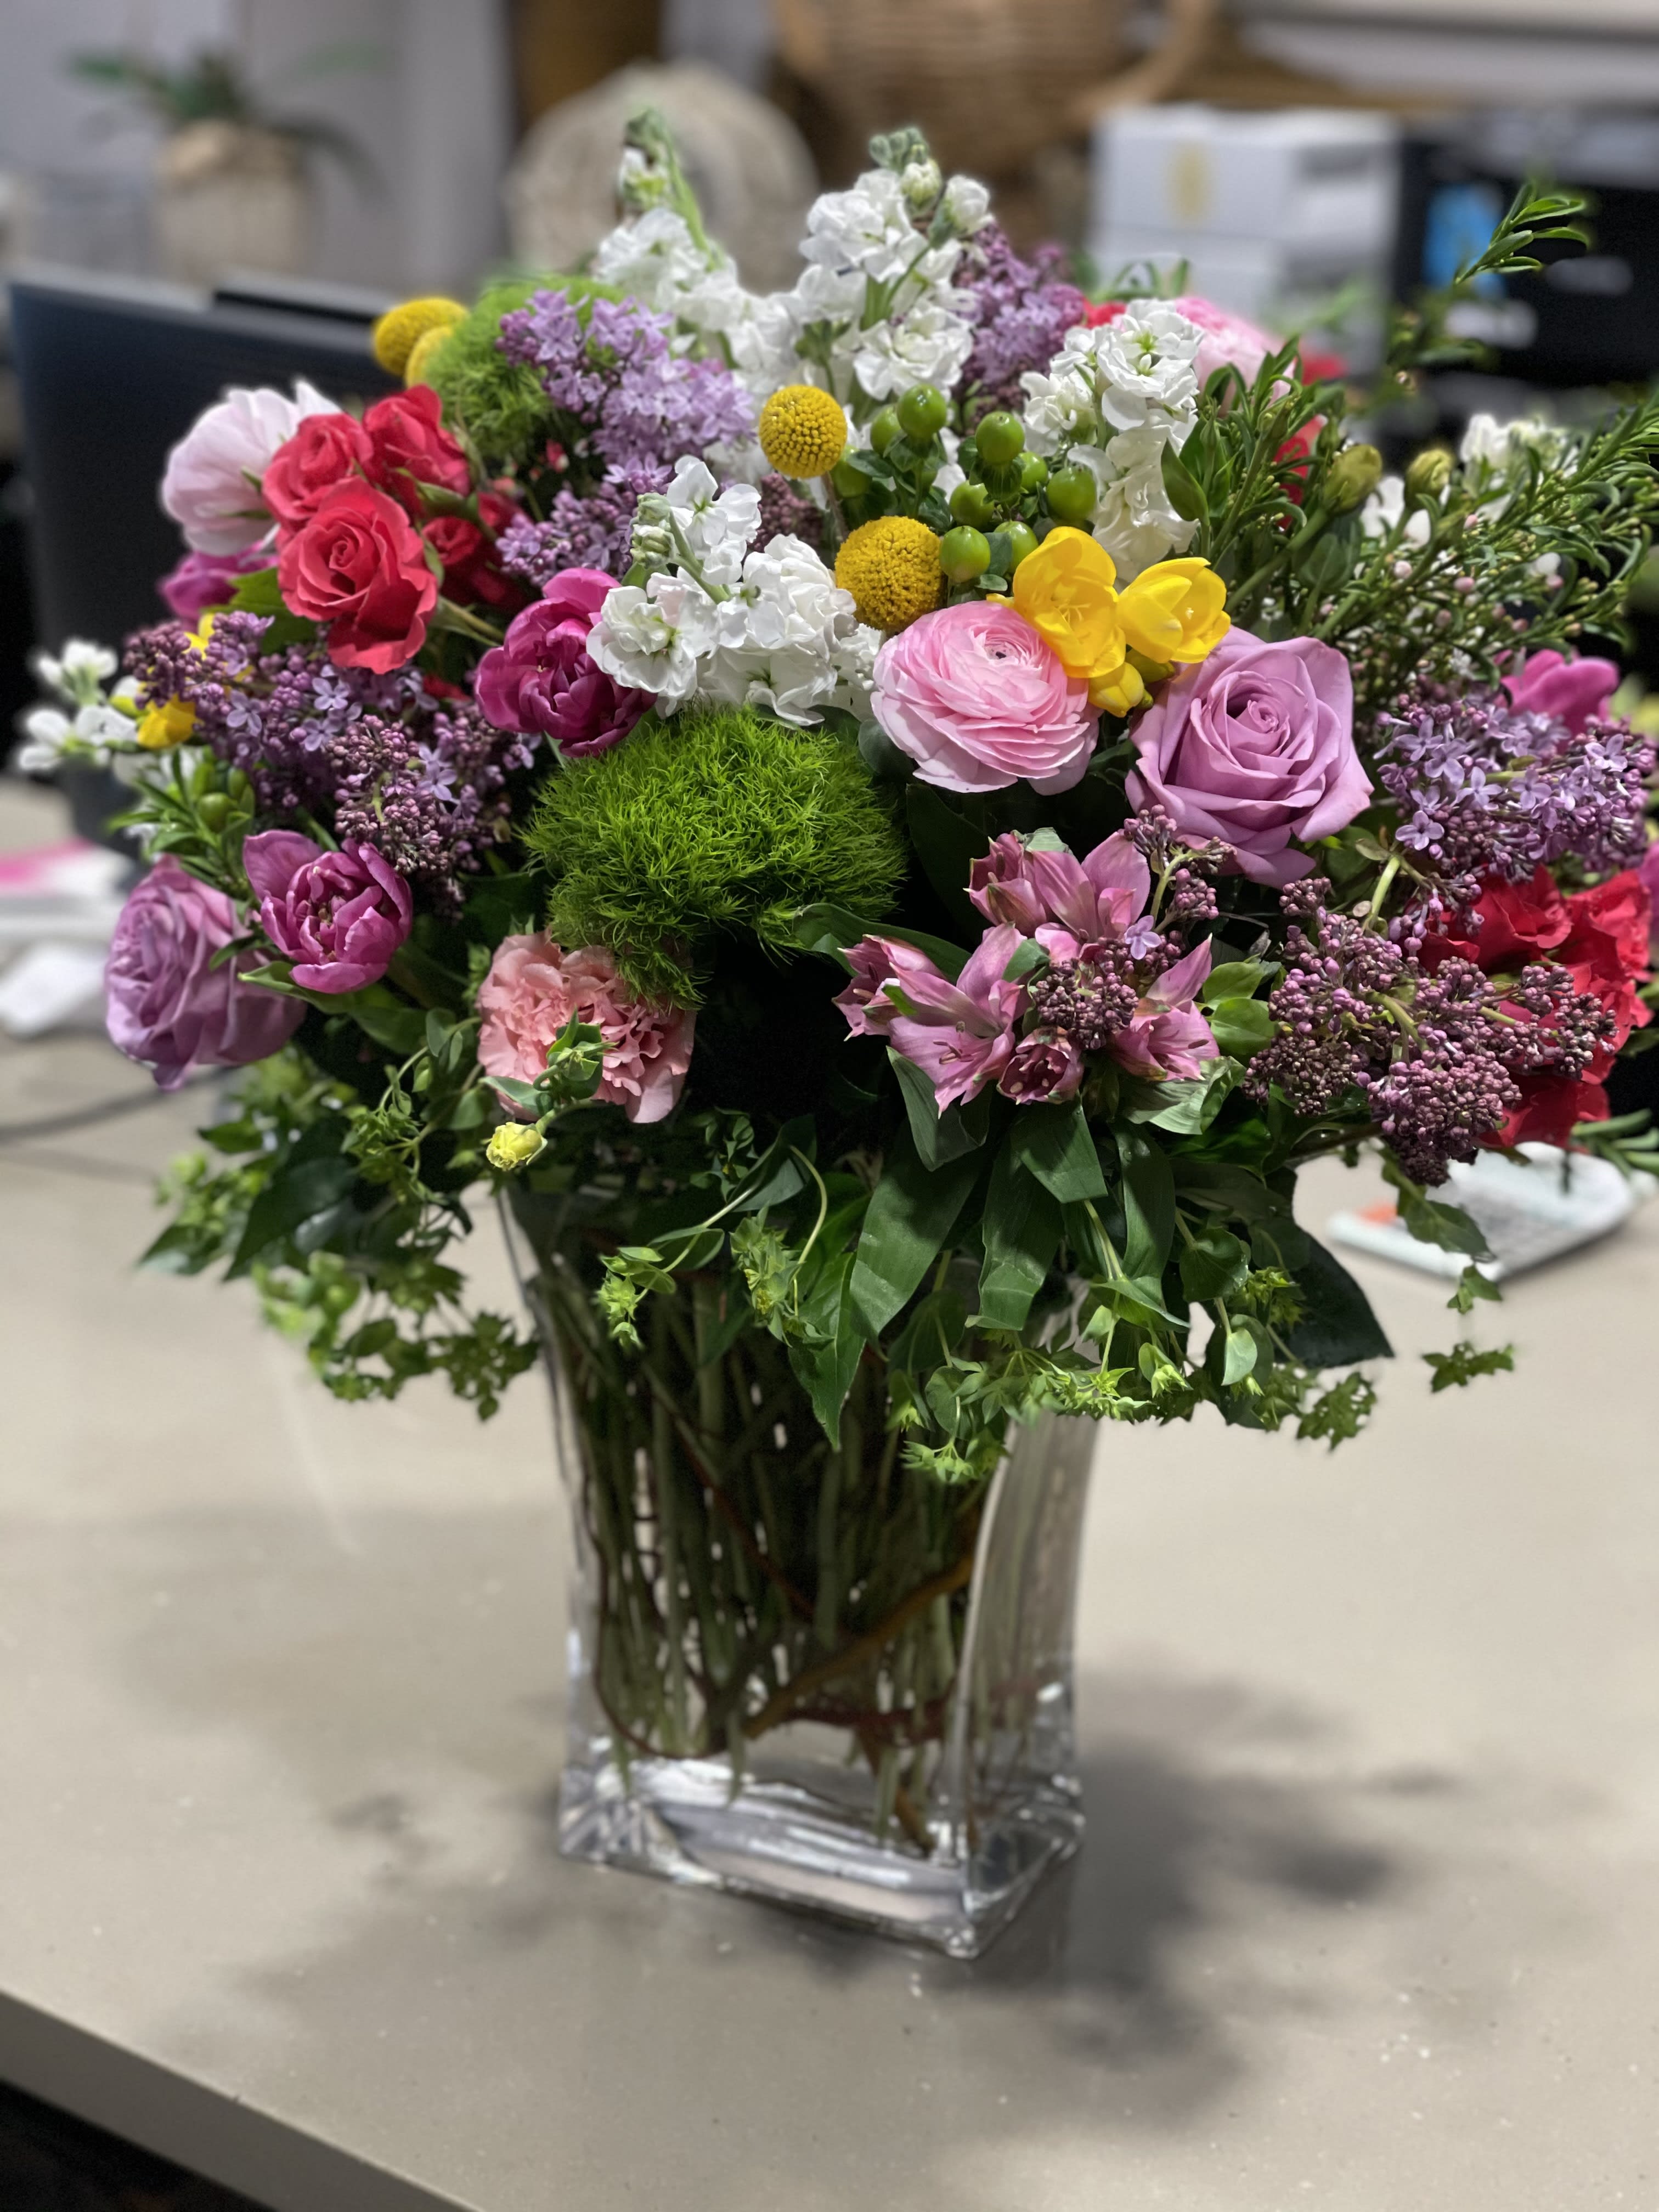 Primavera - Beautiful combinations of Spring flowers like Roses, Tulips, Stock, Ranunculus, Dianthus, freesia and greenery in a tall glass vase. Flowers are subject to change based on availability.  